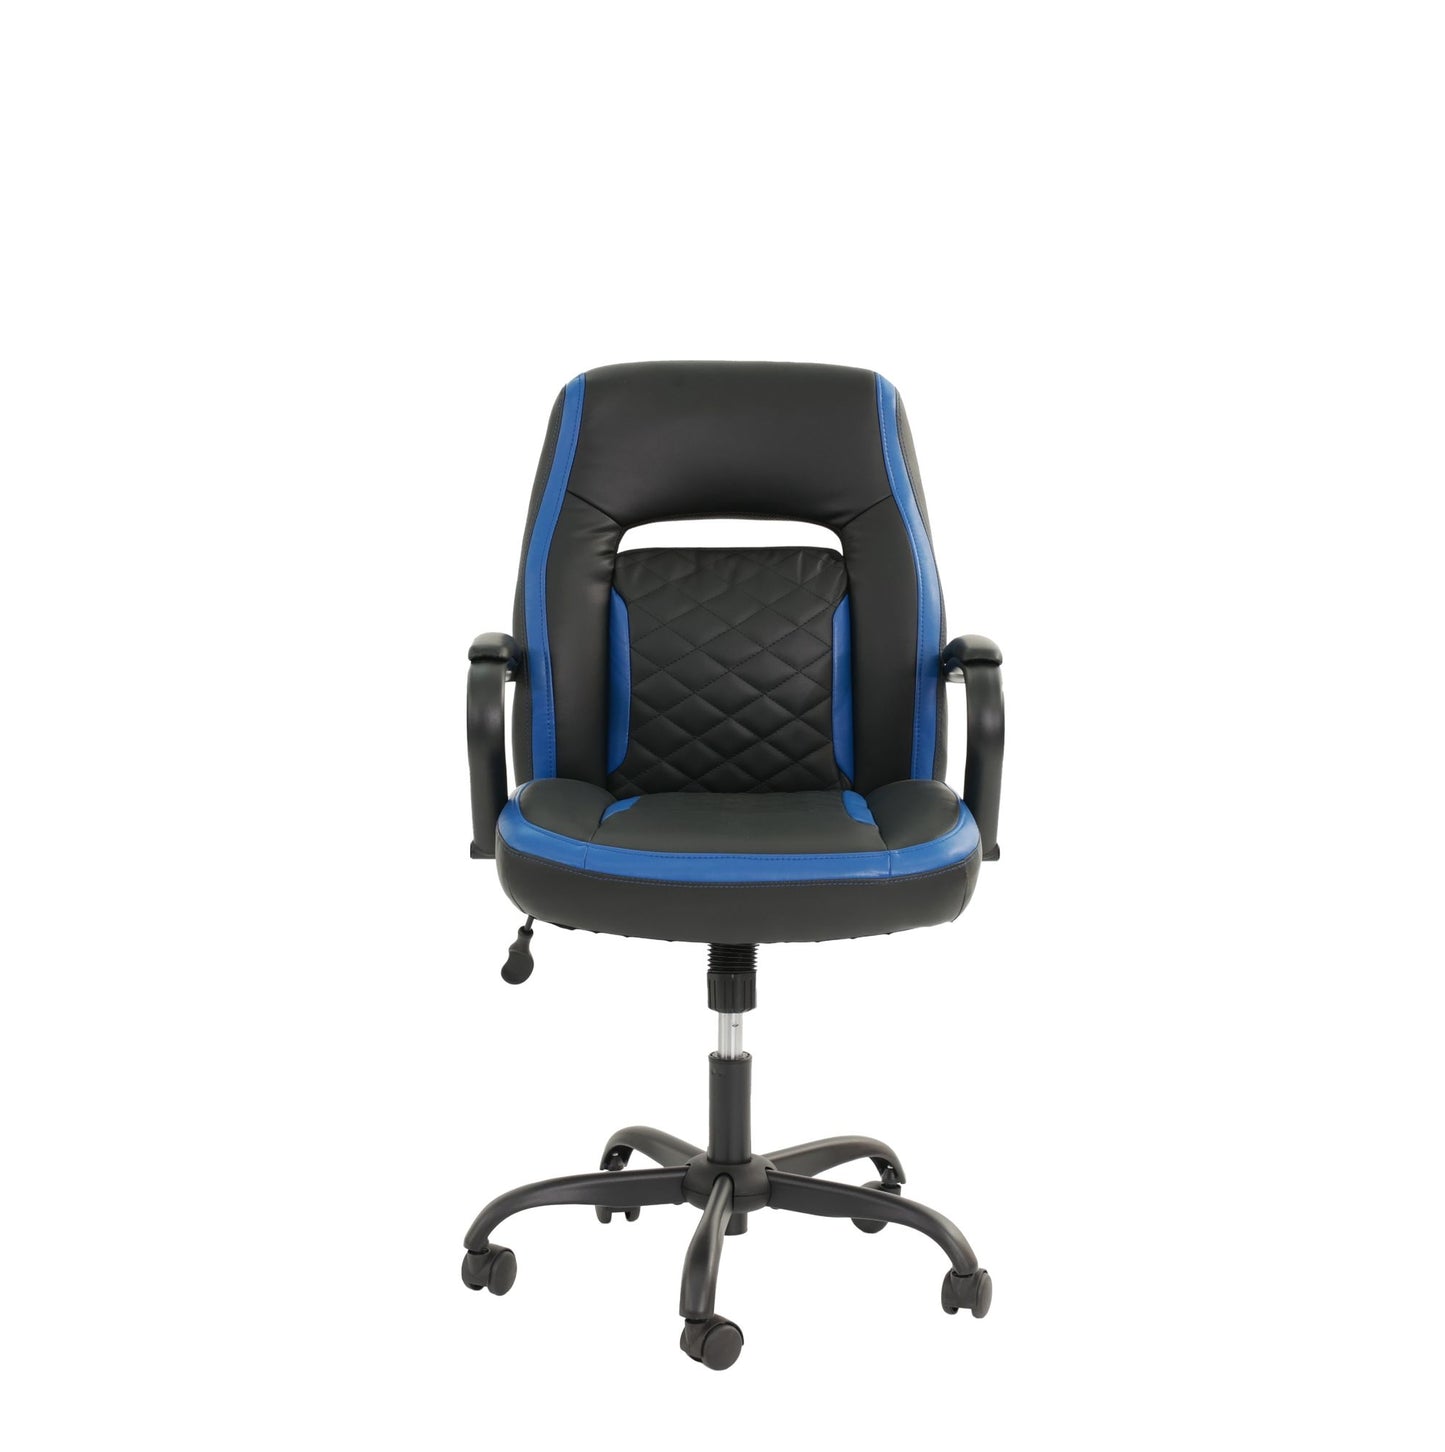 OFFICE CHAIR in Black Faux Leather